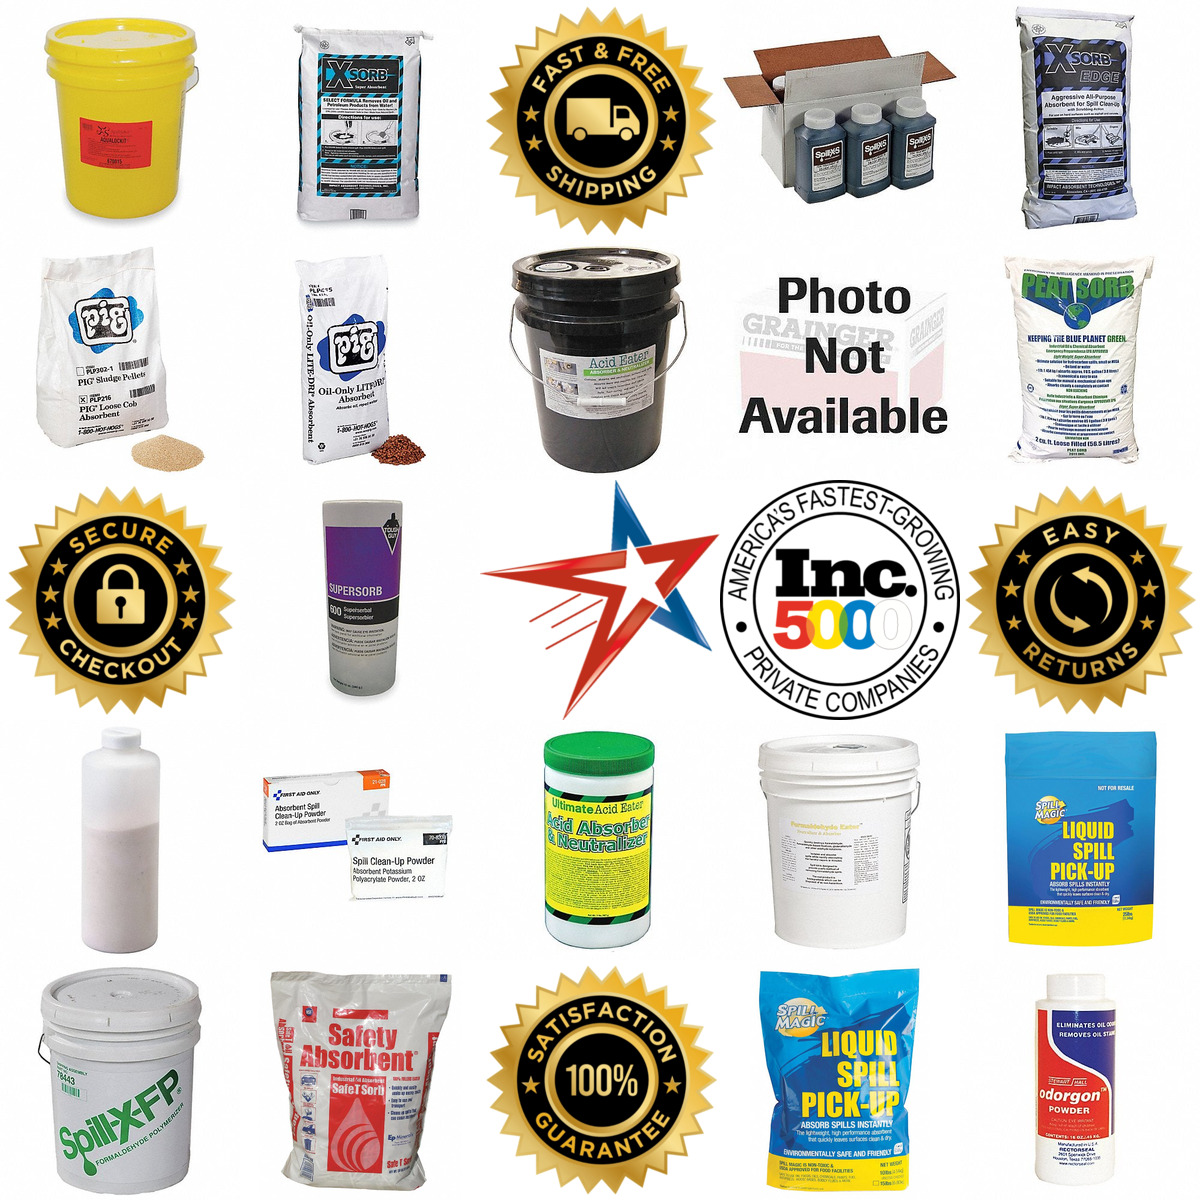 A selection of Granular and Loose Absorbents products on GoVets